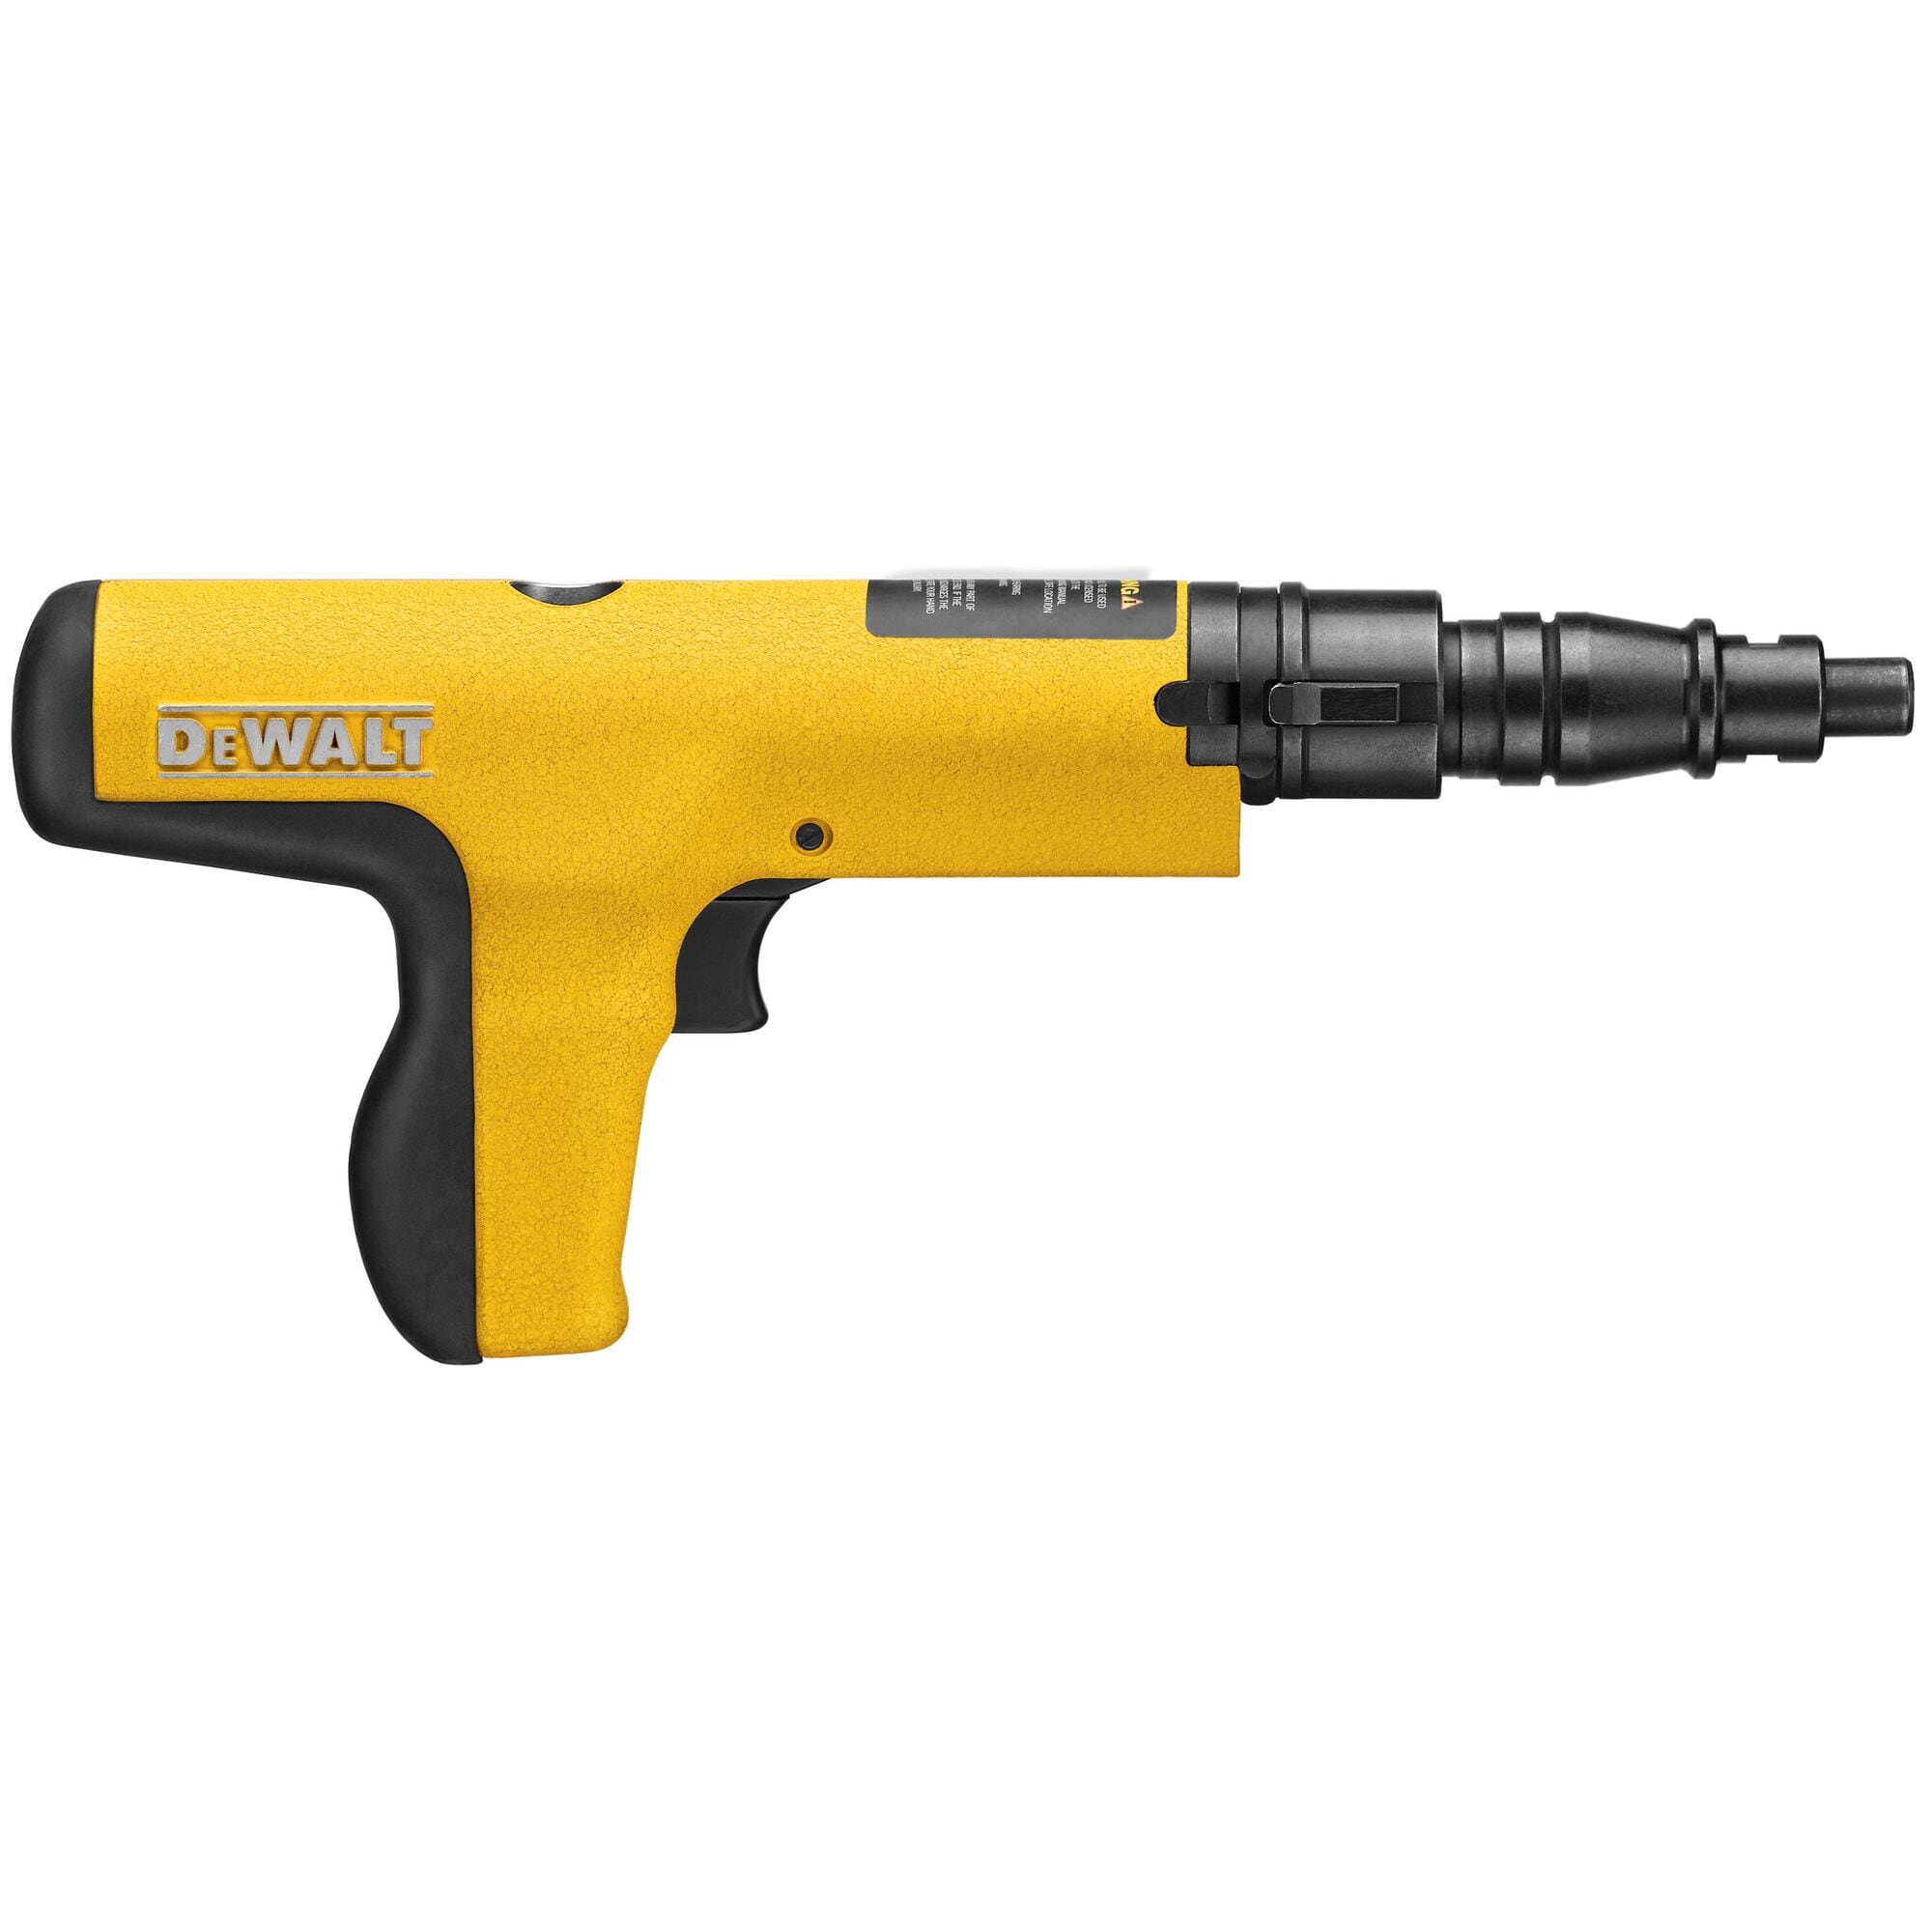 Powder Actuated Tools at Lowes.com